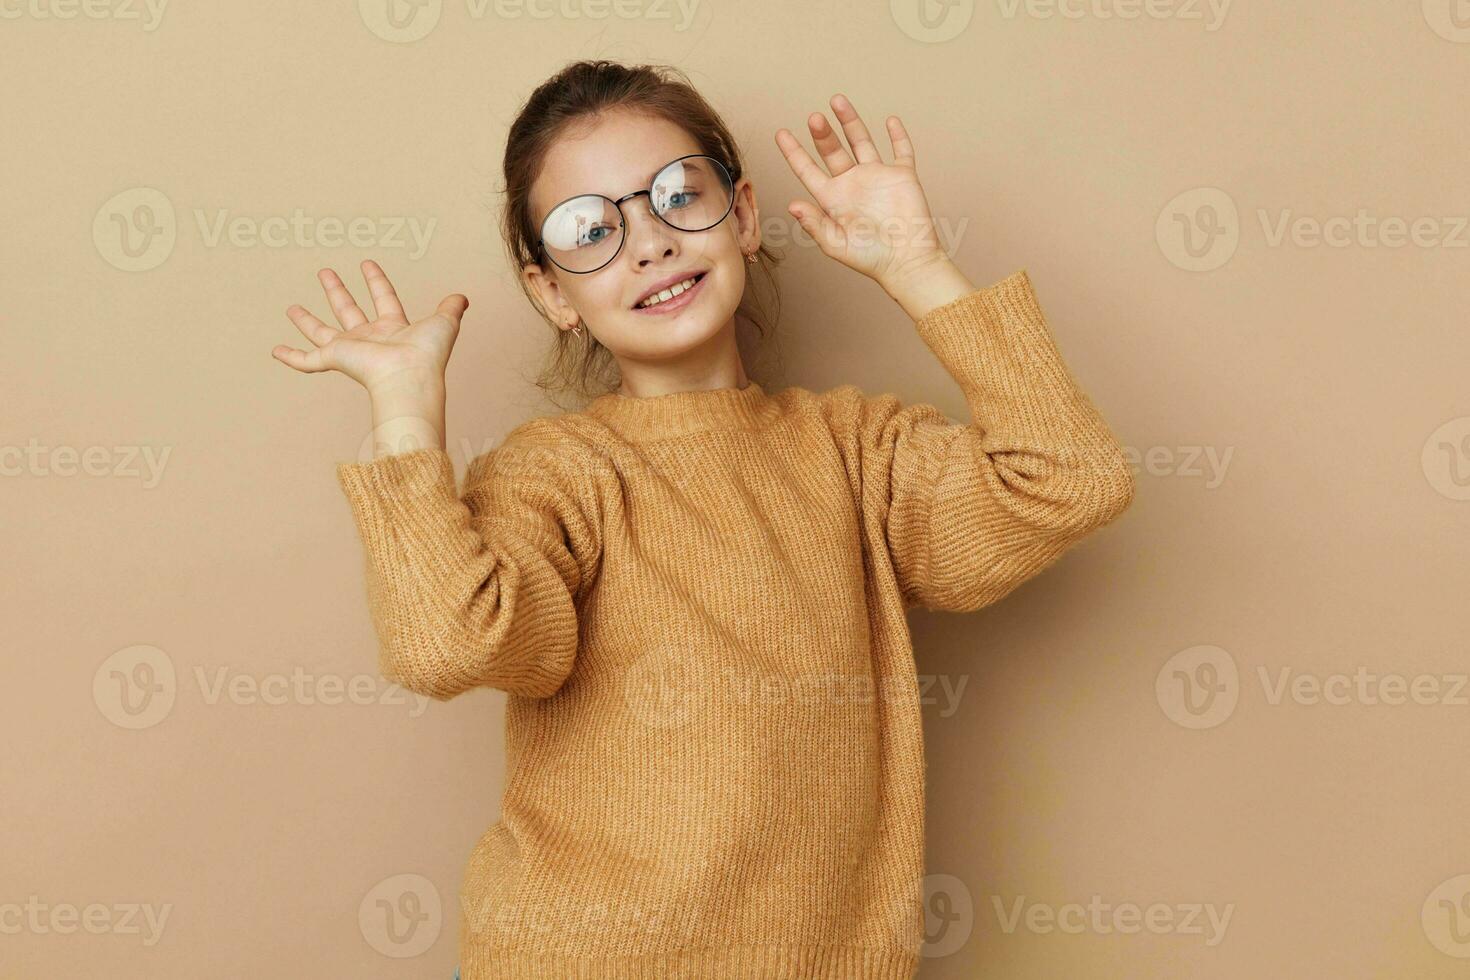 Portrait of happy smiling child girl with glasses emotions gesture hands Lifestyle unaltered photo